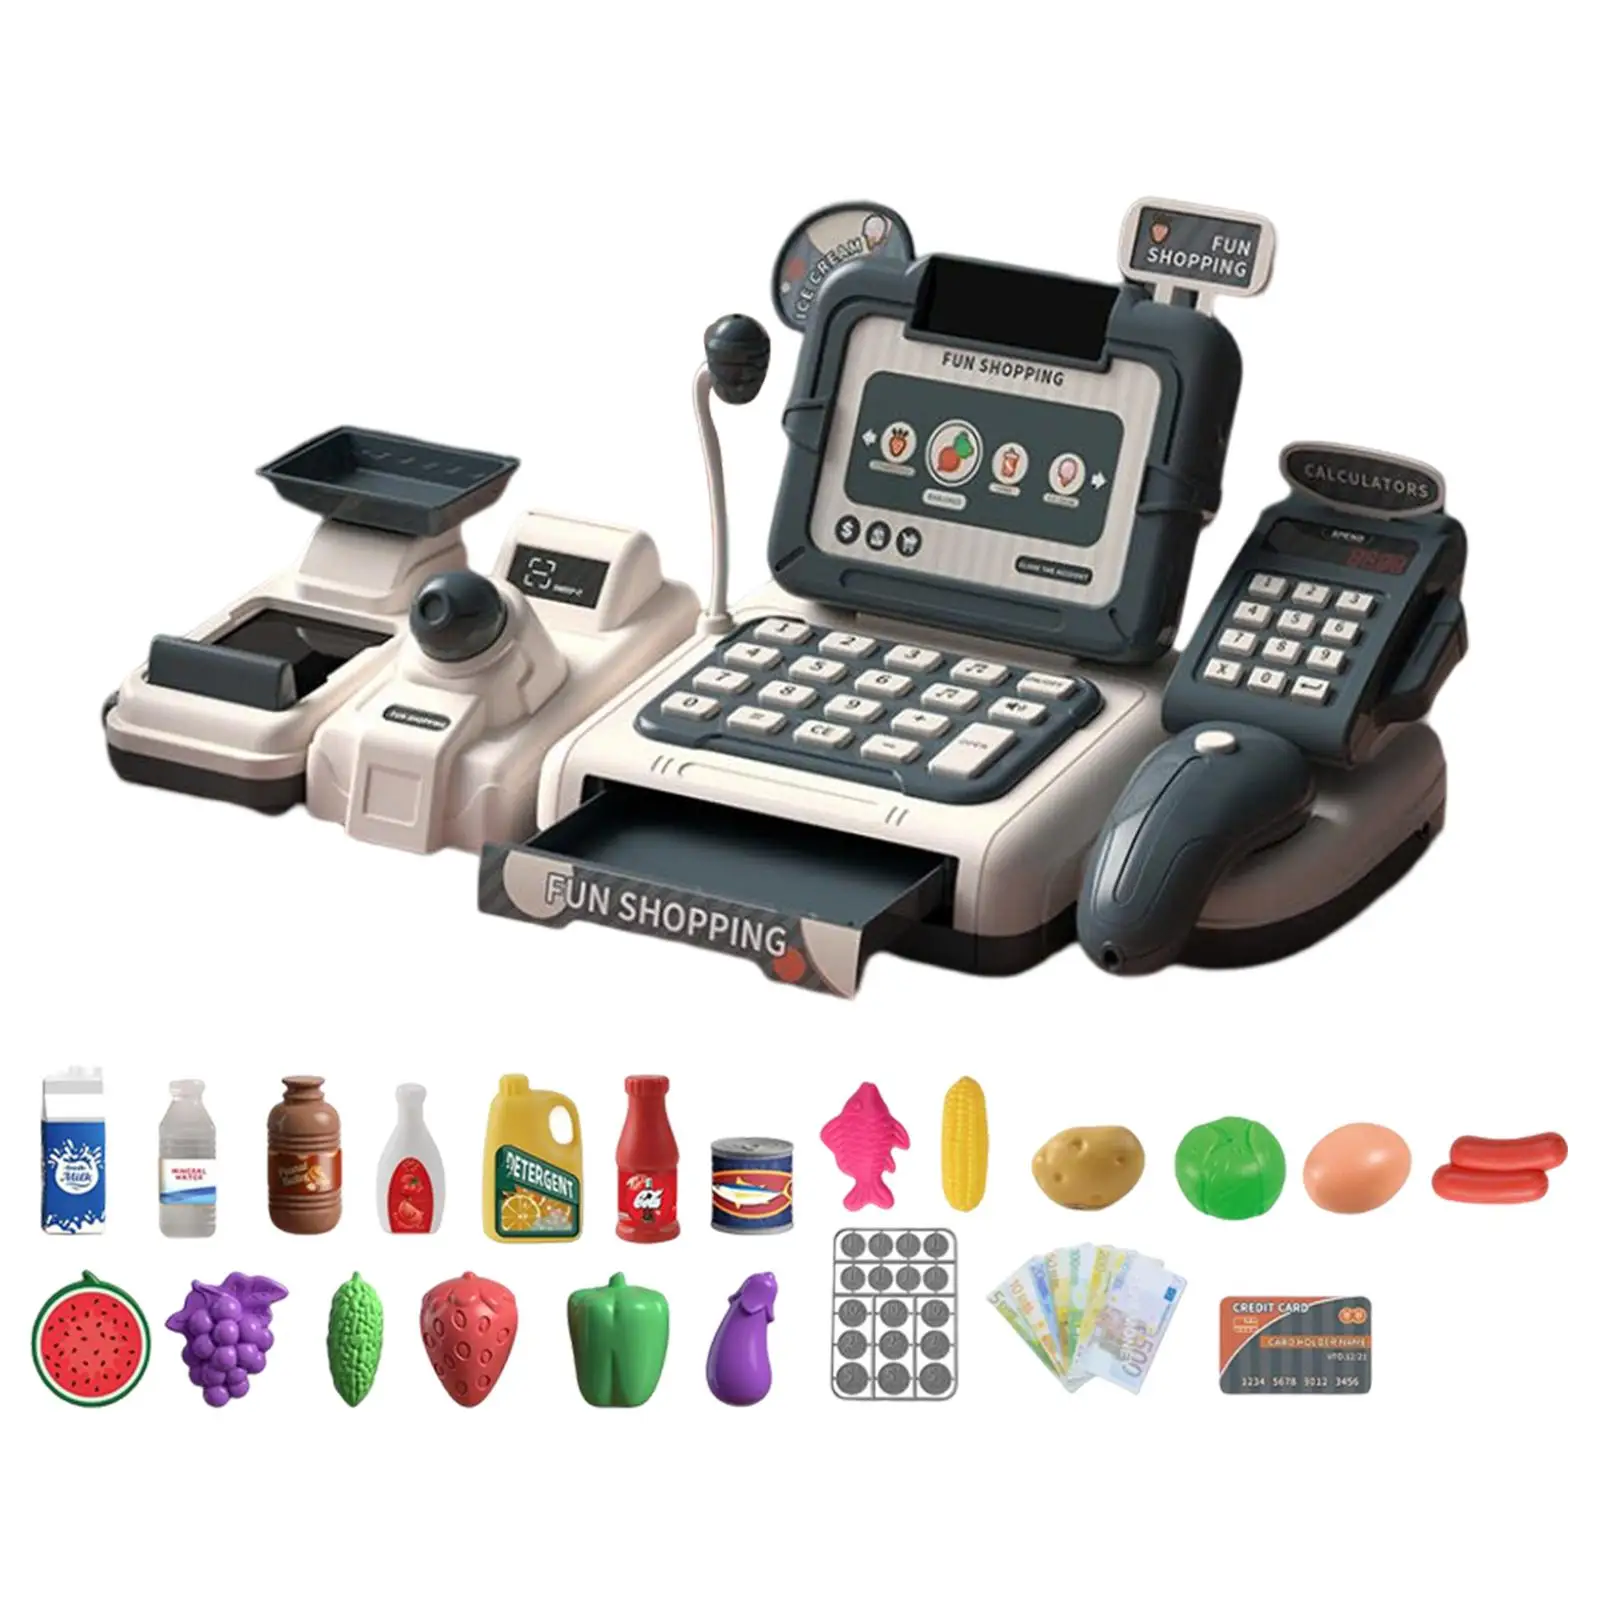 Store Cashier Toys Grocery Store Pretend Play Store Shopping Playset Cash Register Cash Register Toy for Girls Kids Party Favor